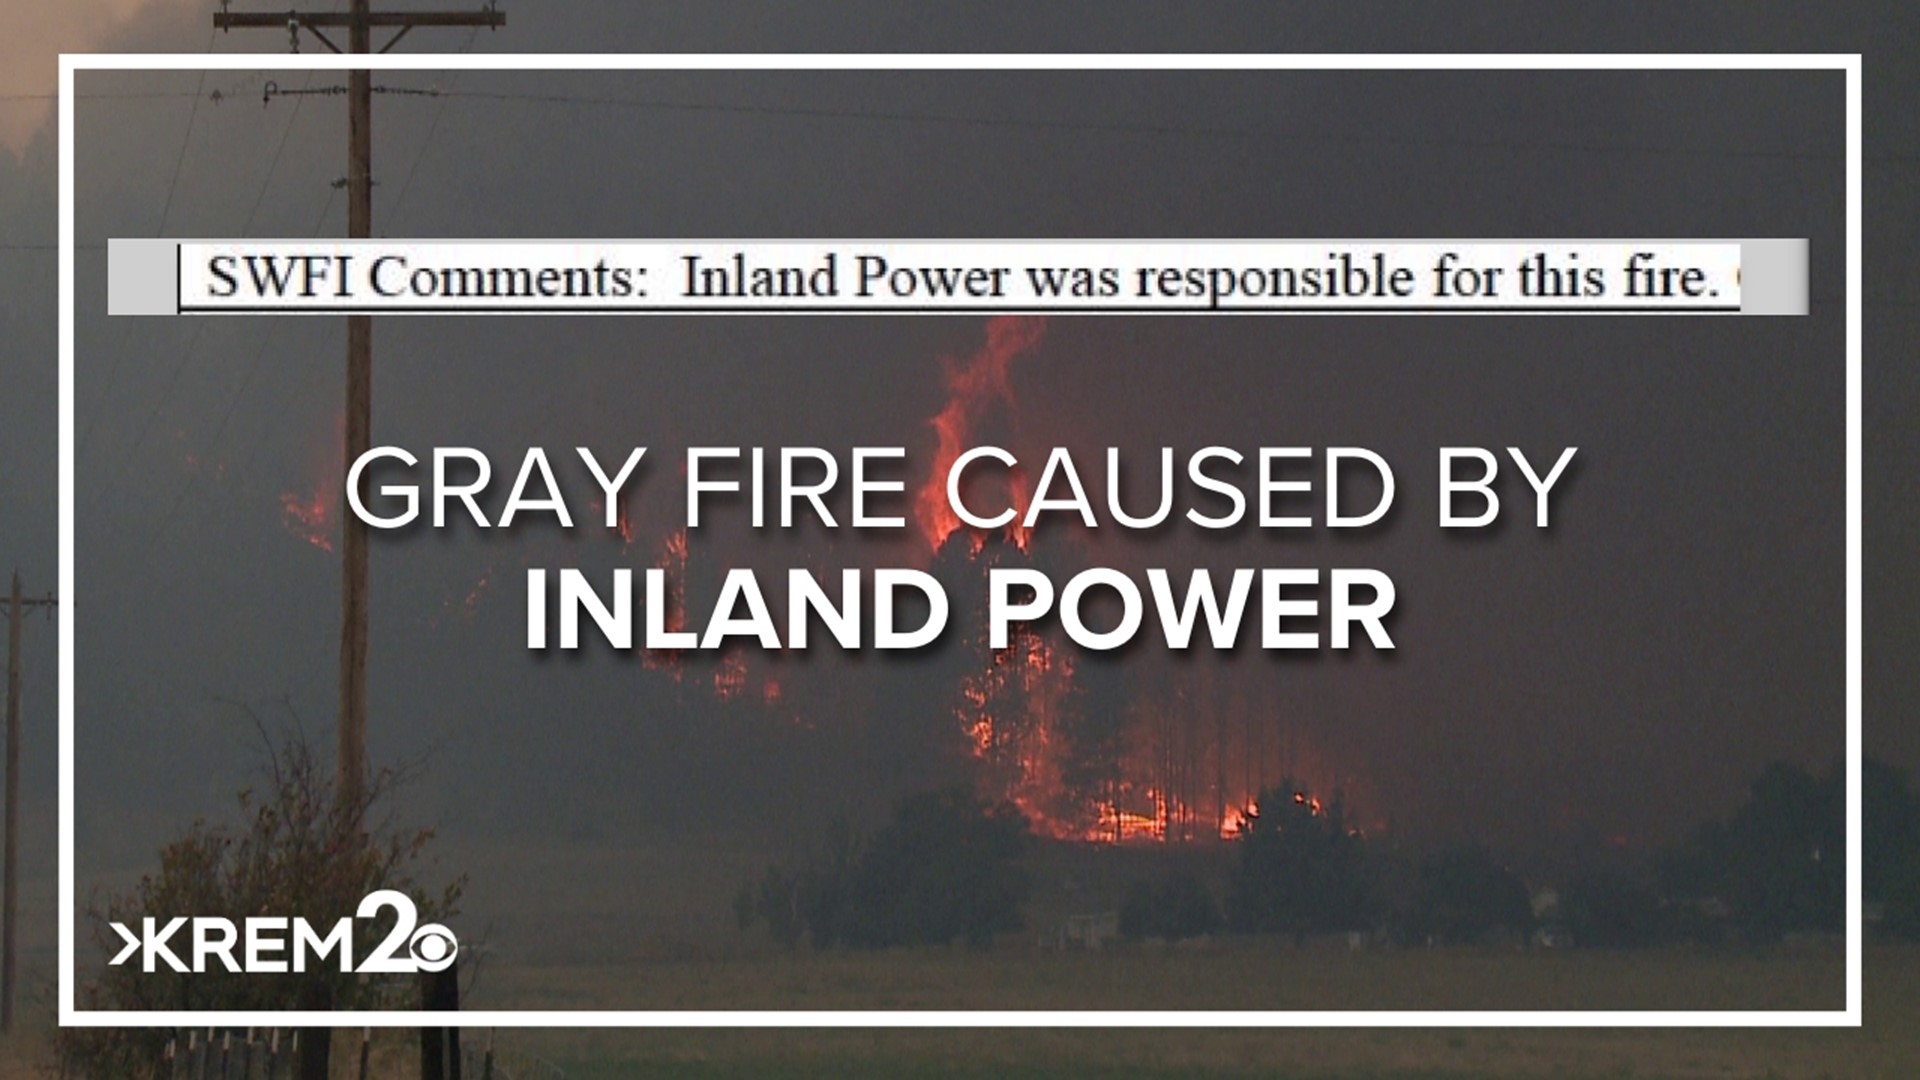 A report from the Washington Department of Natural Resources says sparks from an Inland Power light started the fire that destroyed the town of Medical Lake.